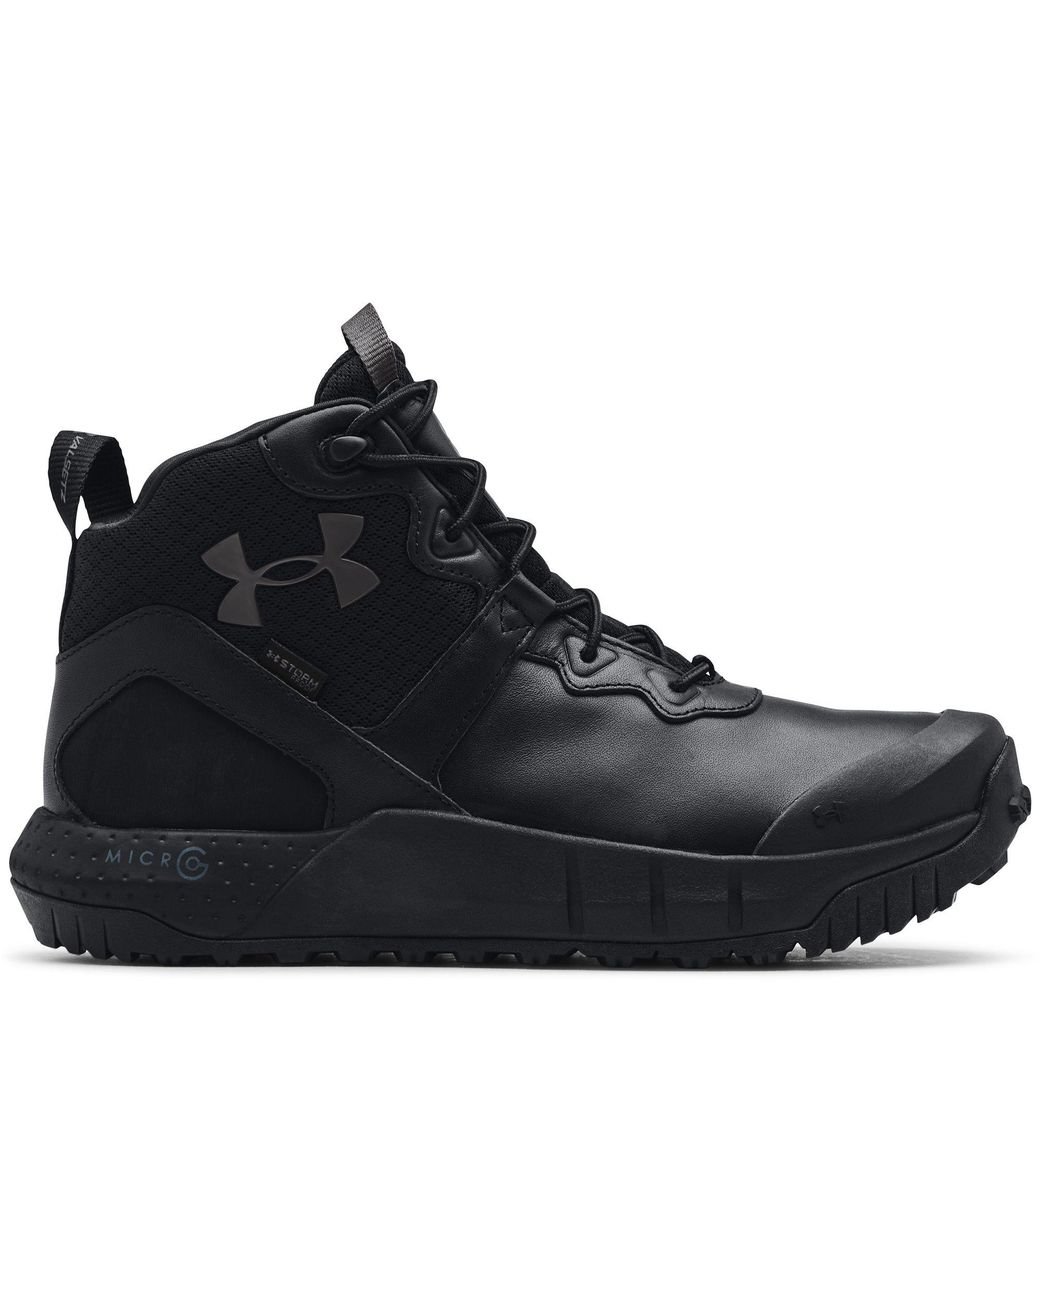 Under Armour Ua Micro G® Valsetz Mid Leather Waterproof Tactical